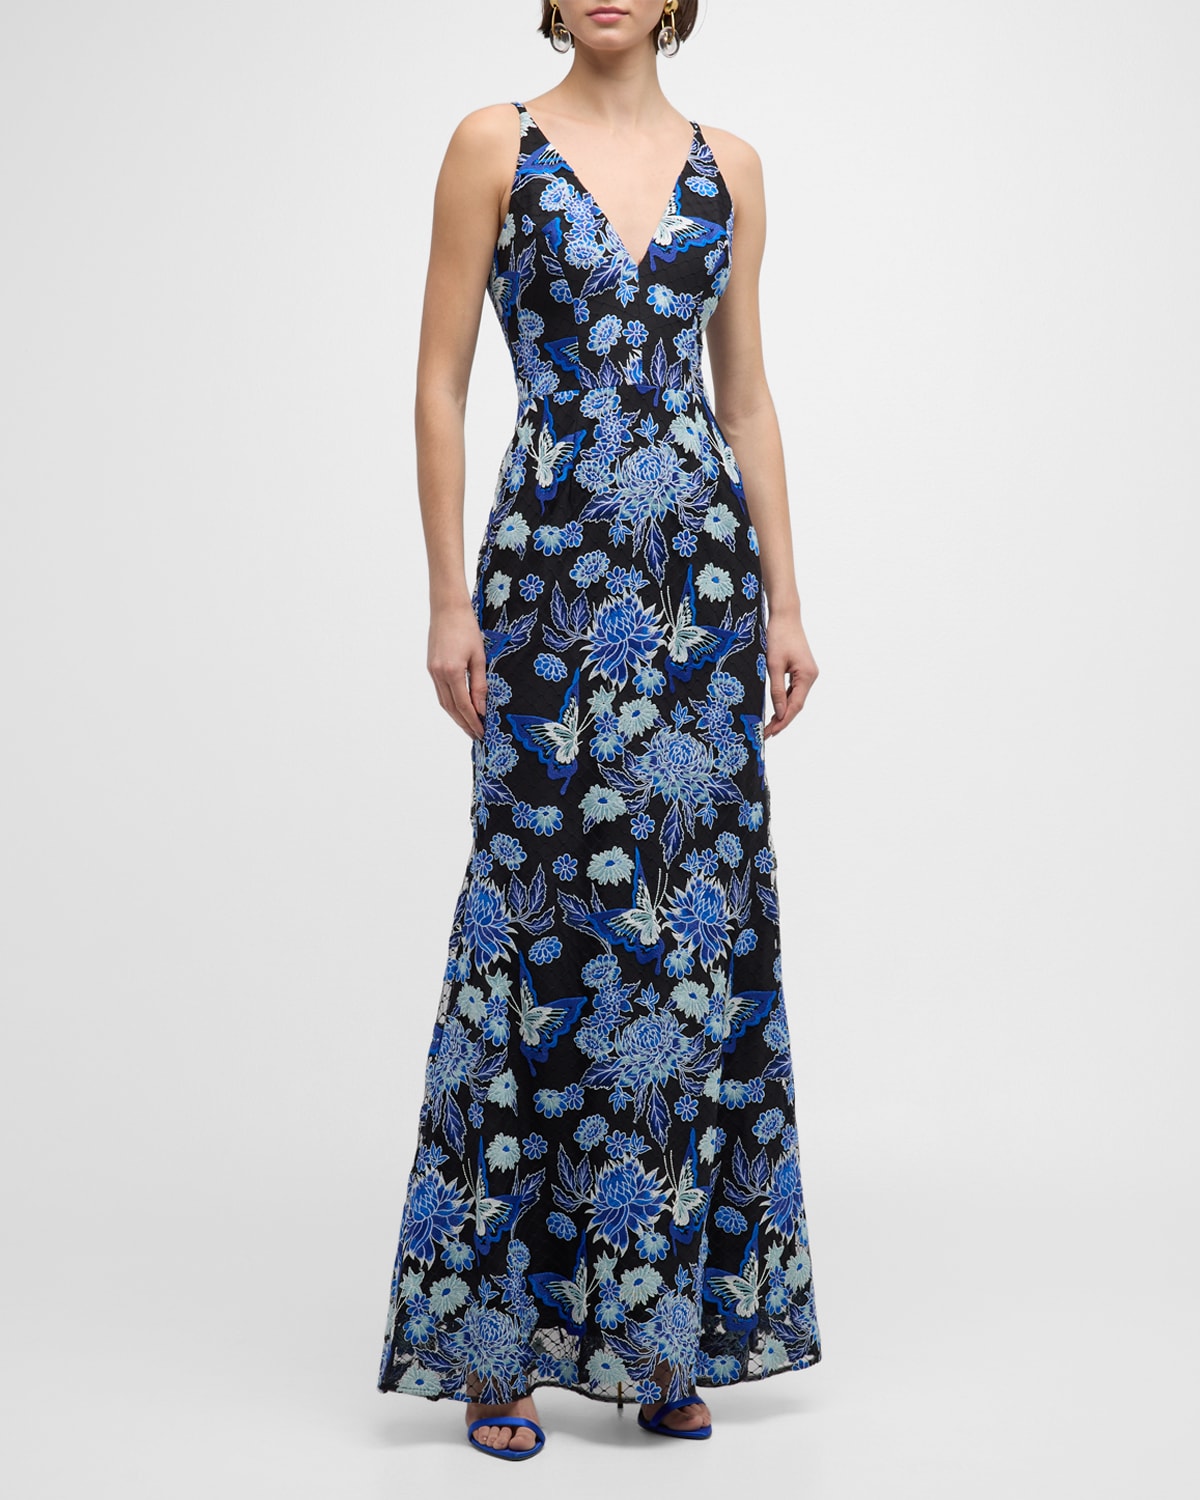 Shop Dress The Population Black Label Sharon Sleeveless Floral-embroidered Gown In Cobalt Multi